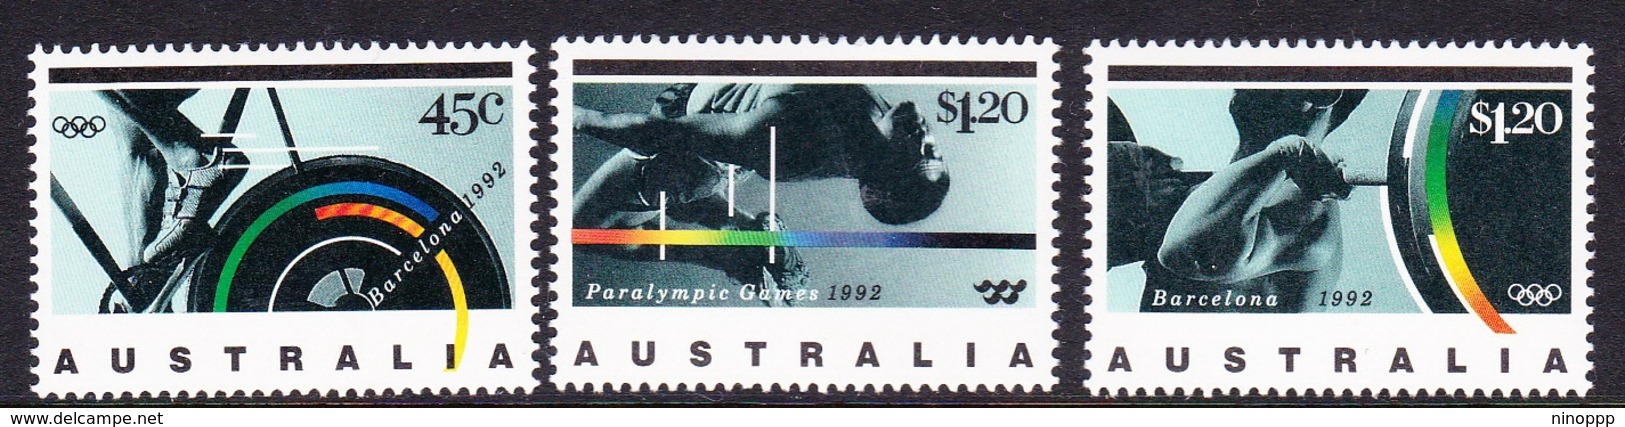 Australia ASC 1355-1357 1992 Olympic Games, Mint Never Hinged - Mint Stamps